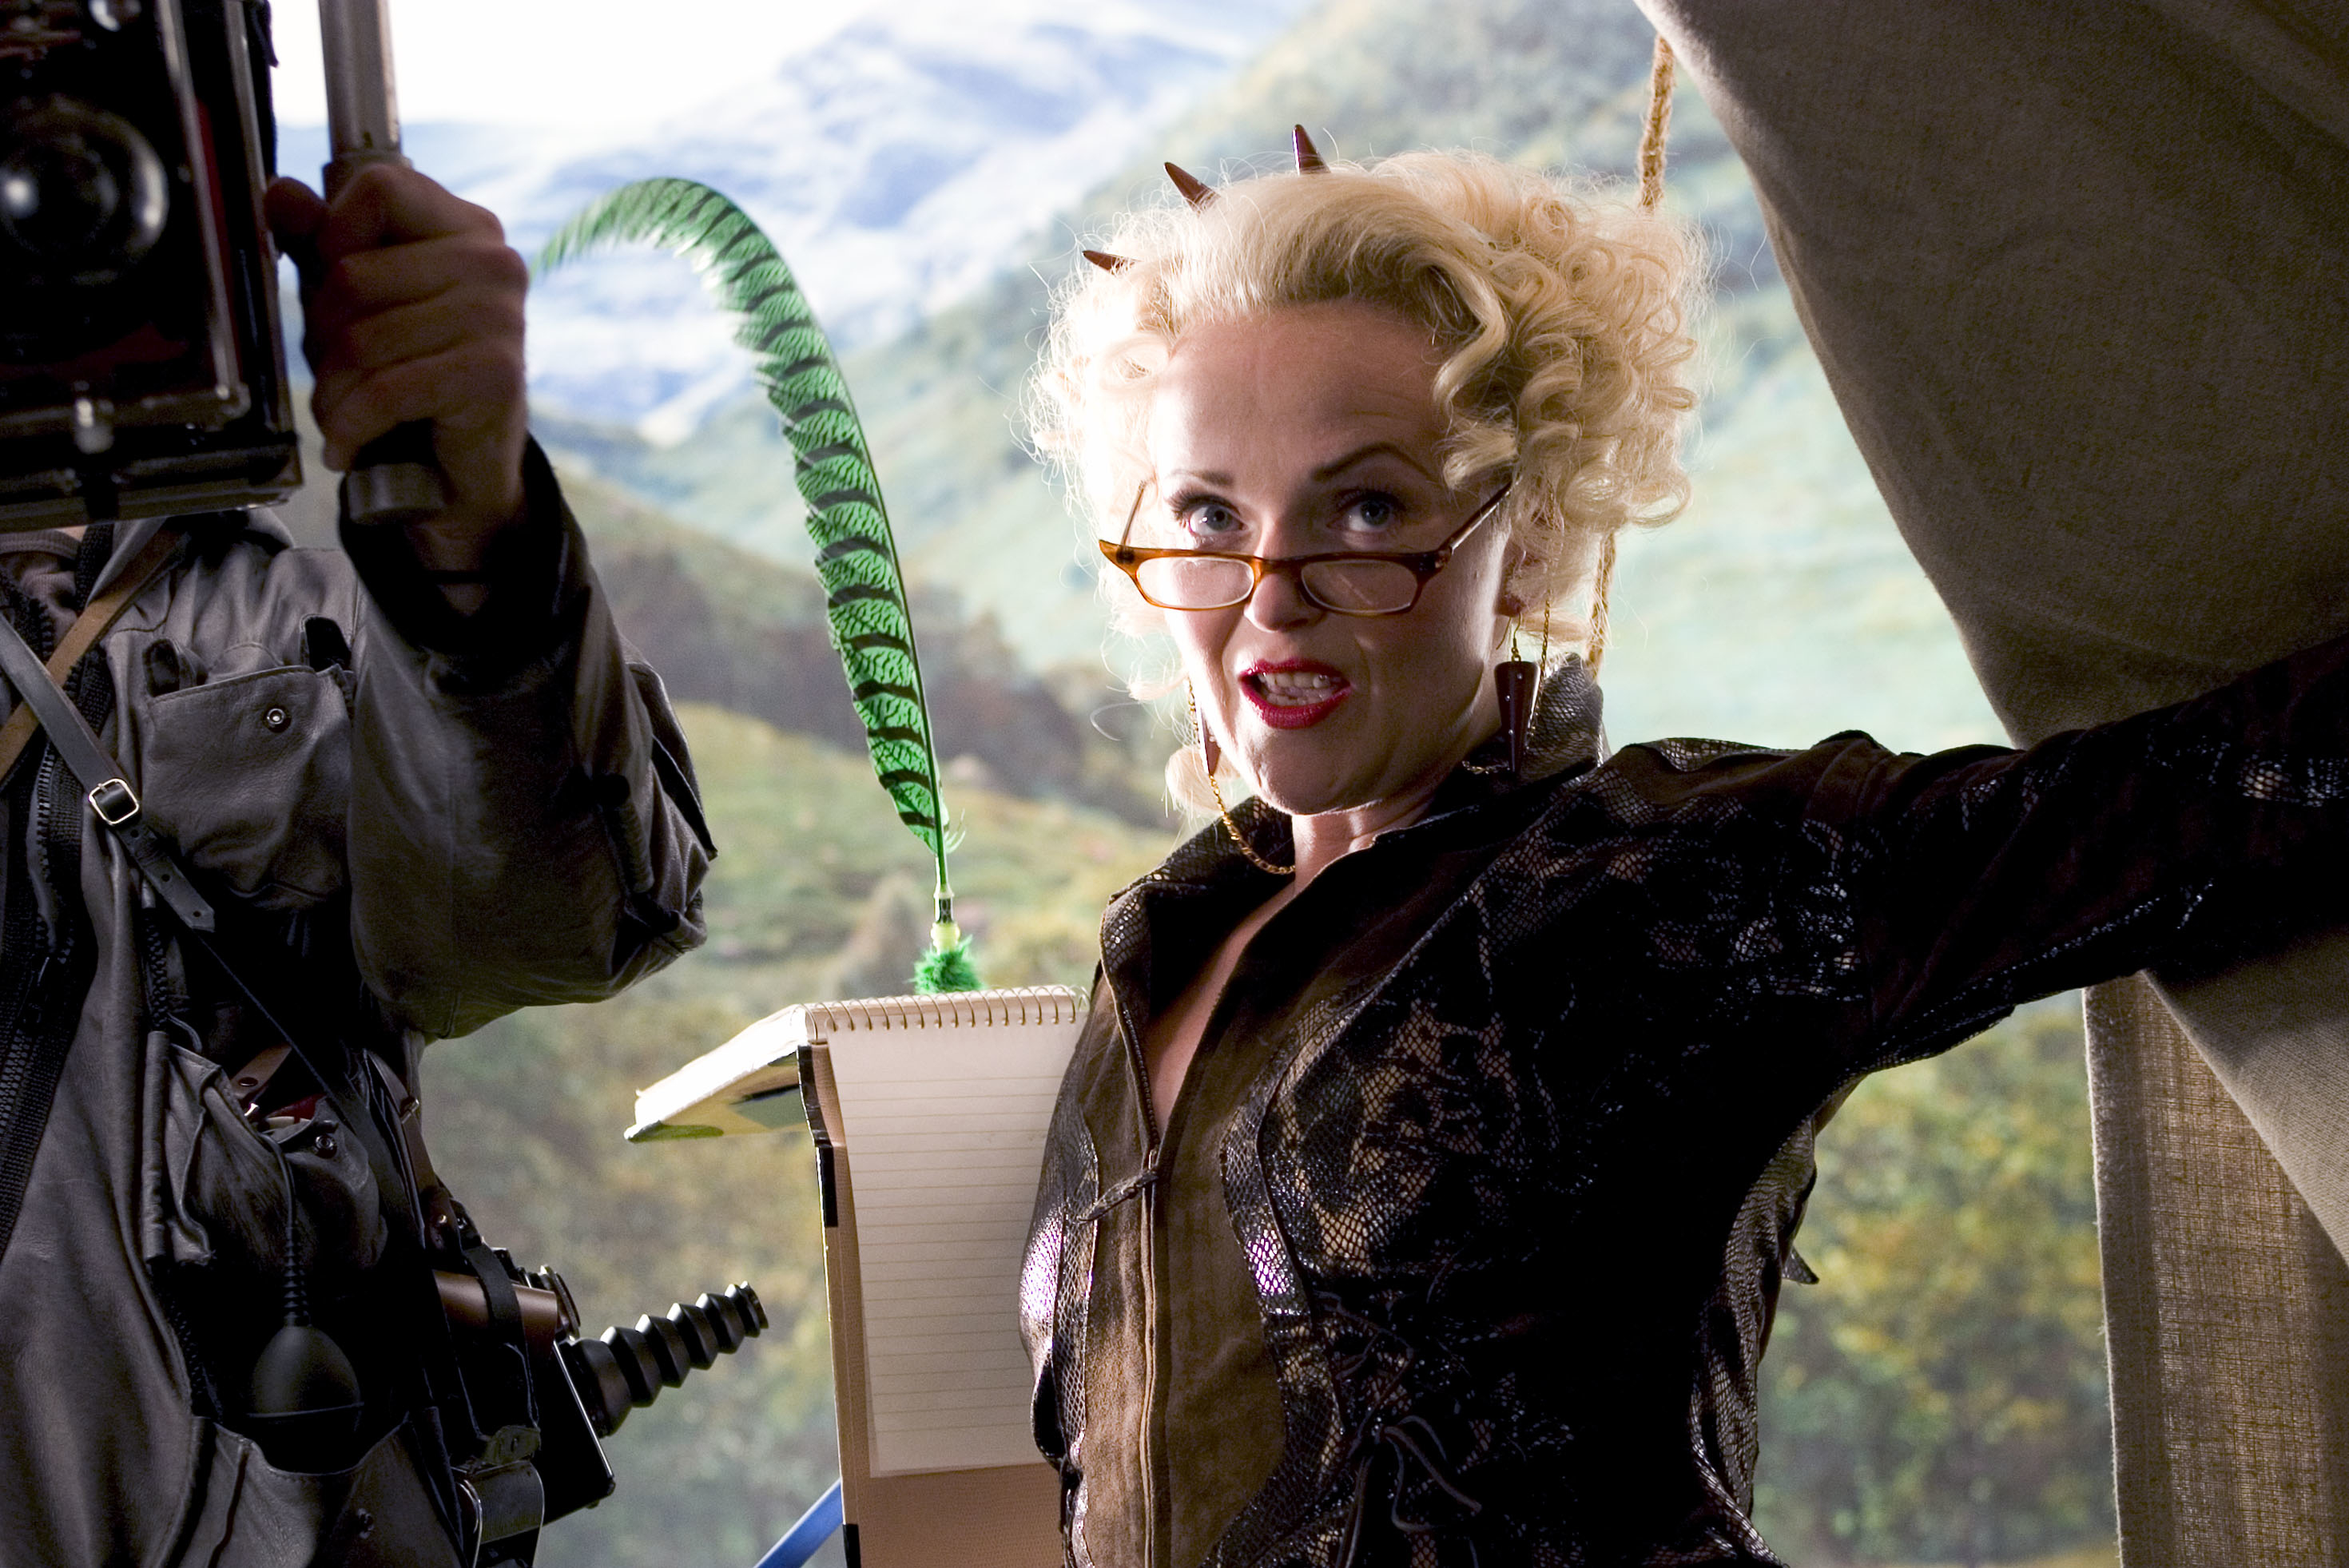 Rita Skeeter from Harry Potter films poses with a quill, wearing a patterned outfit